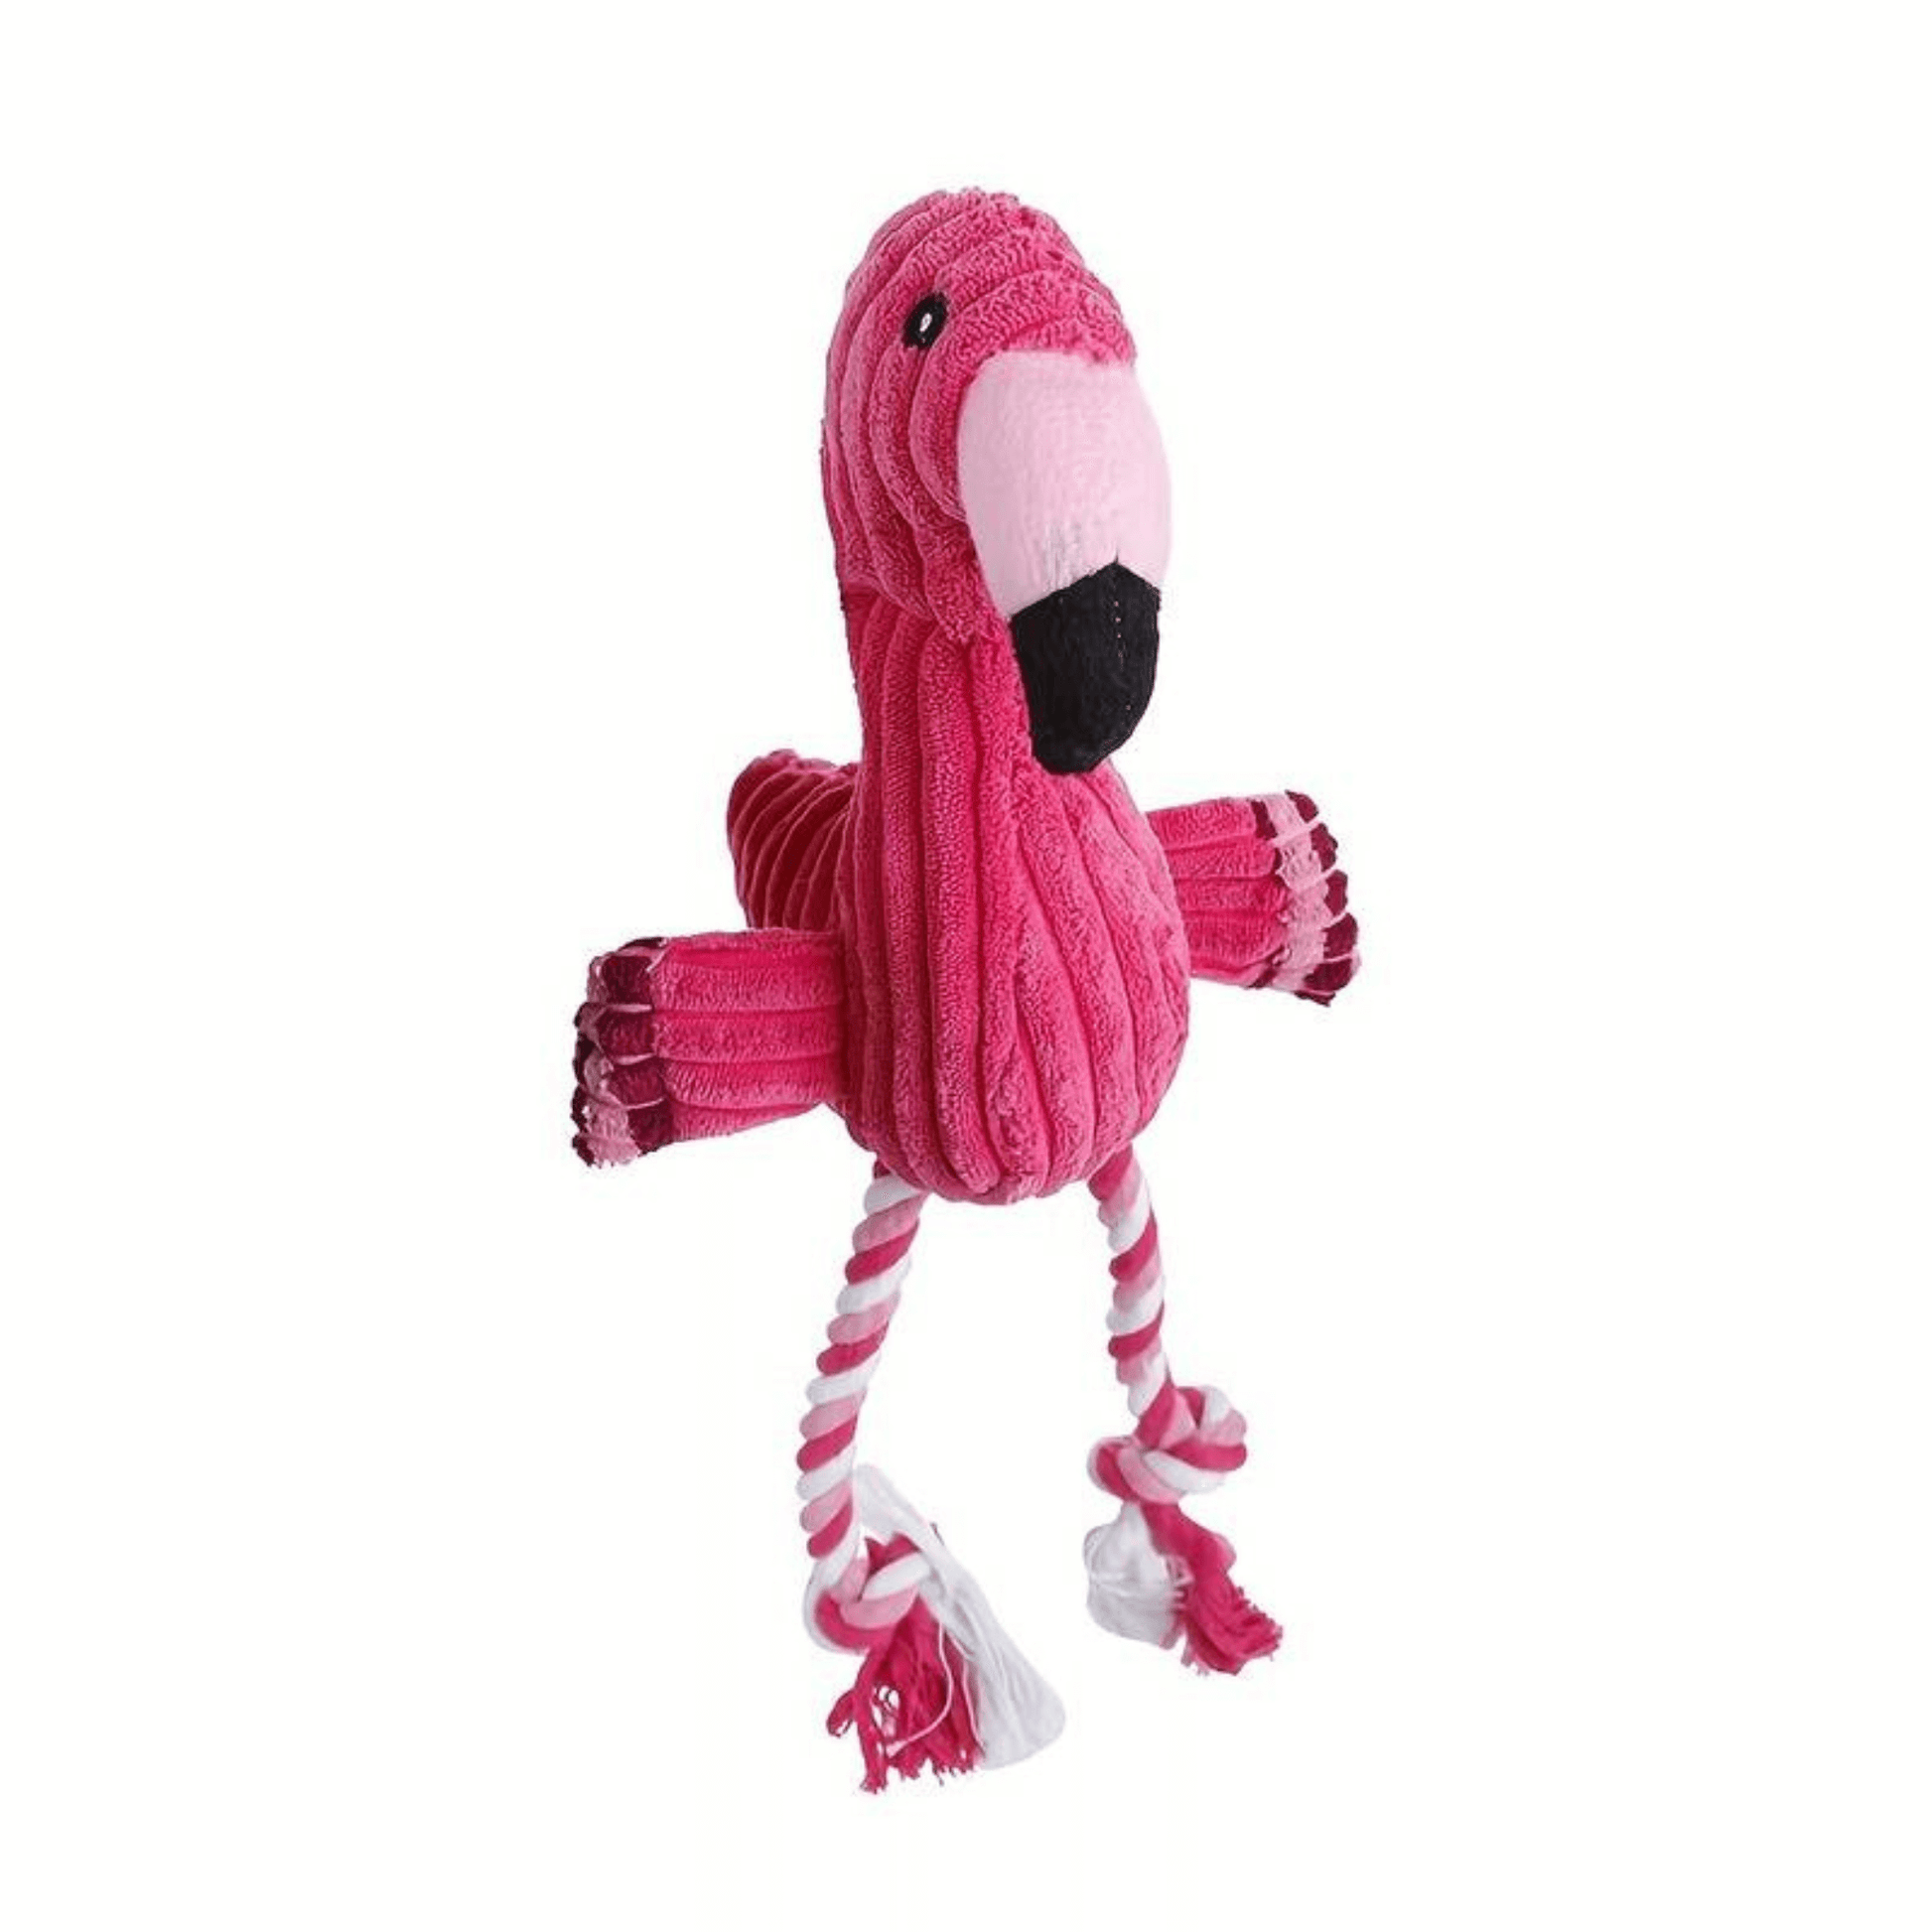 A close-up of the head of a pink flamingo dog toy. The toy has a soft, plush bill and eyes, and it has a squeaker inside. The toy is perfect for both large and small dogs, and it is sure to keep your furry friend entertained.